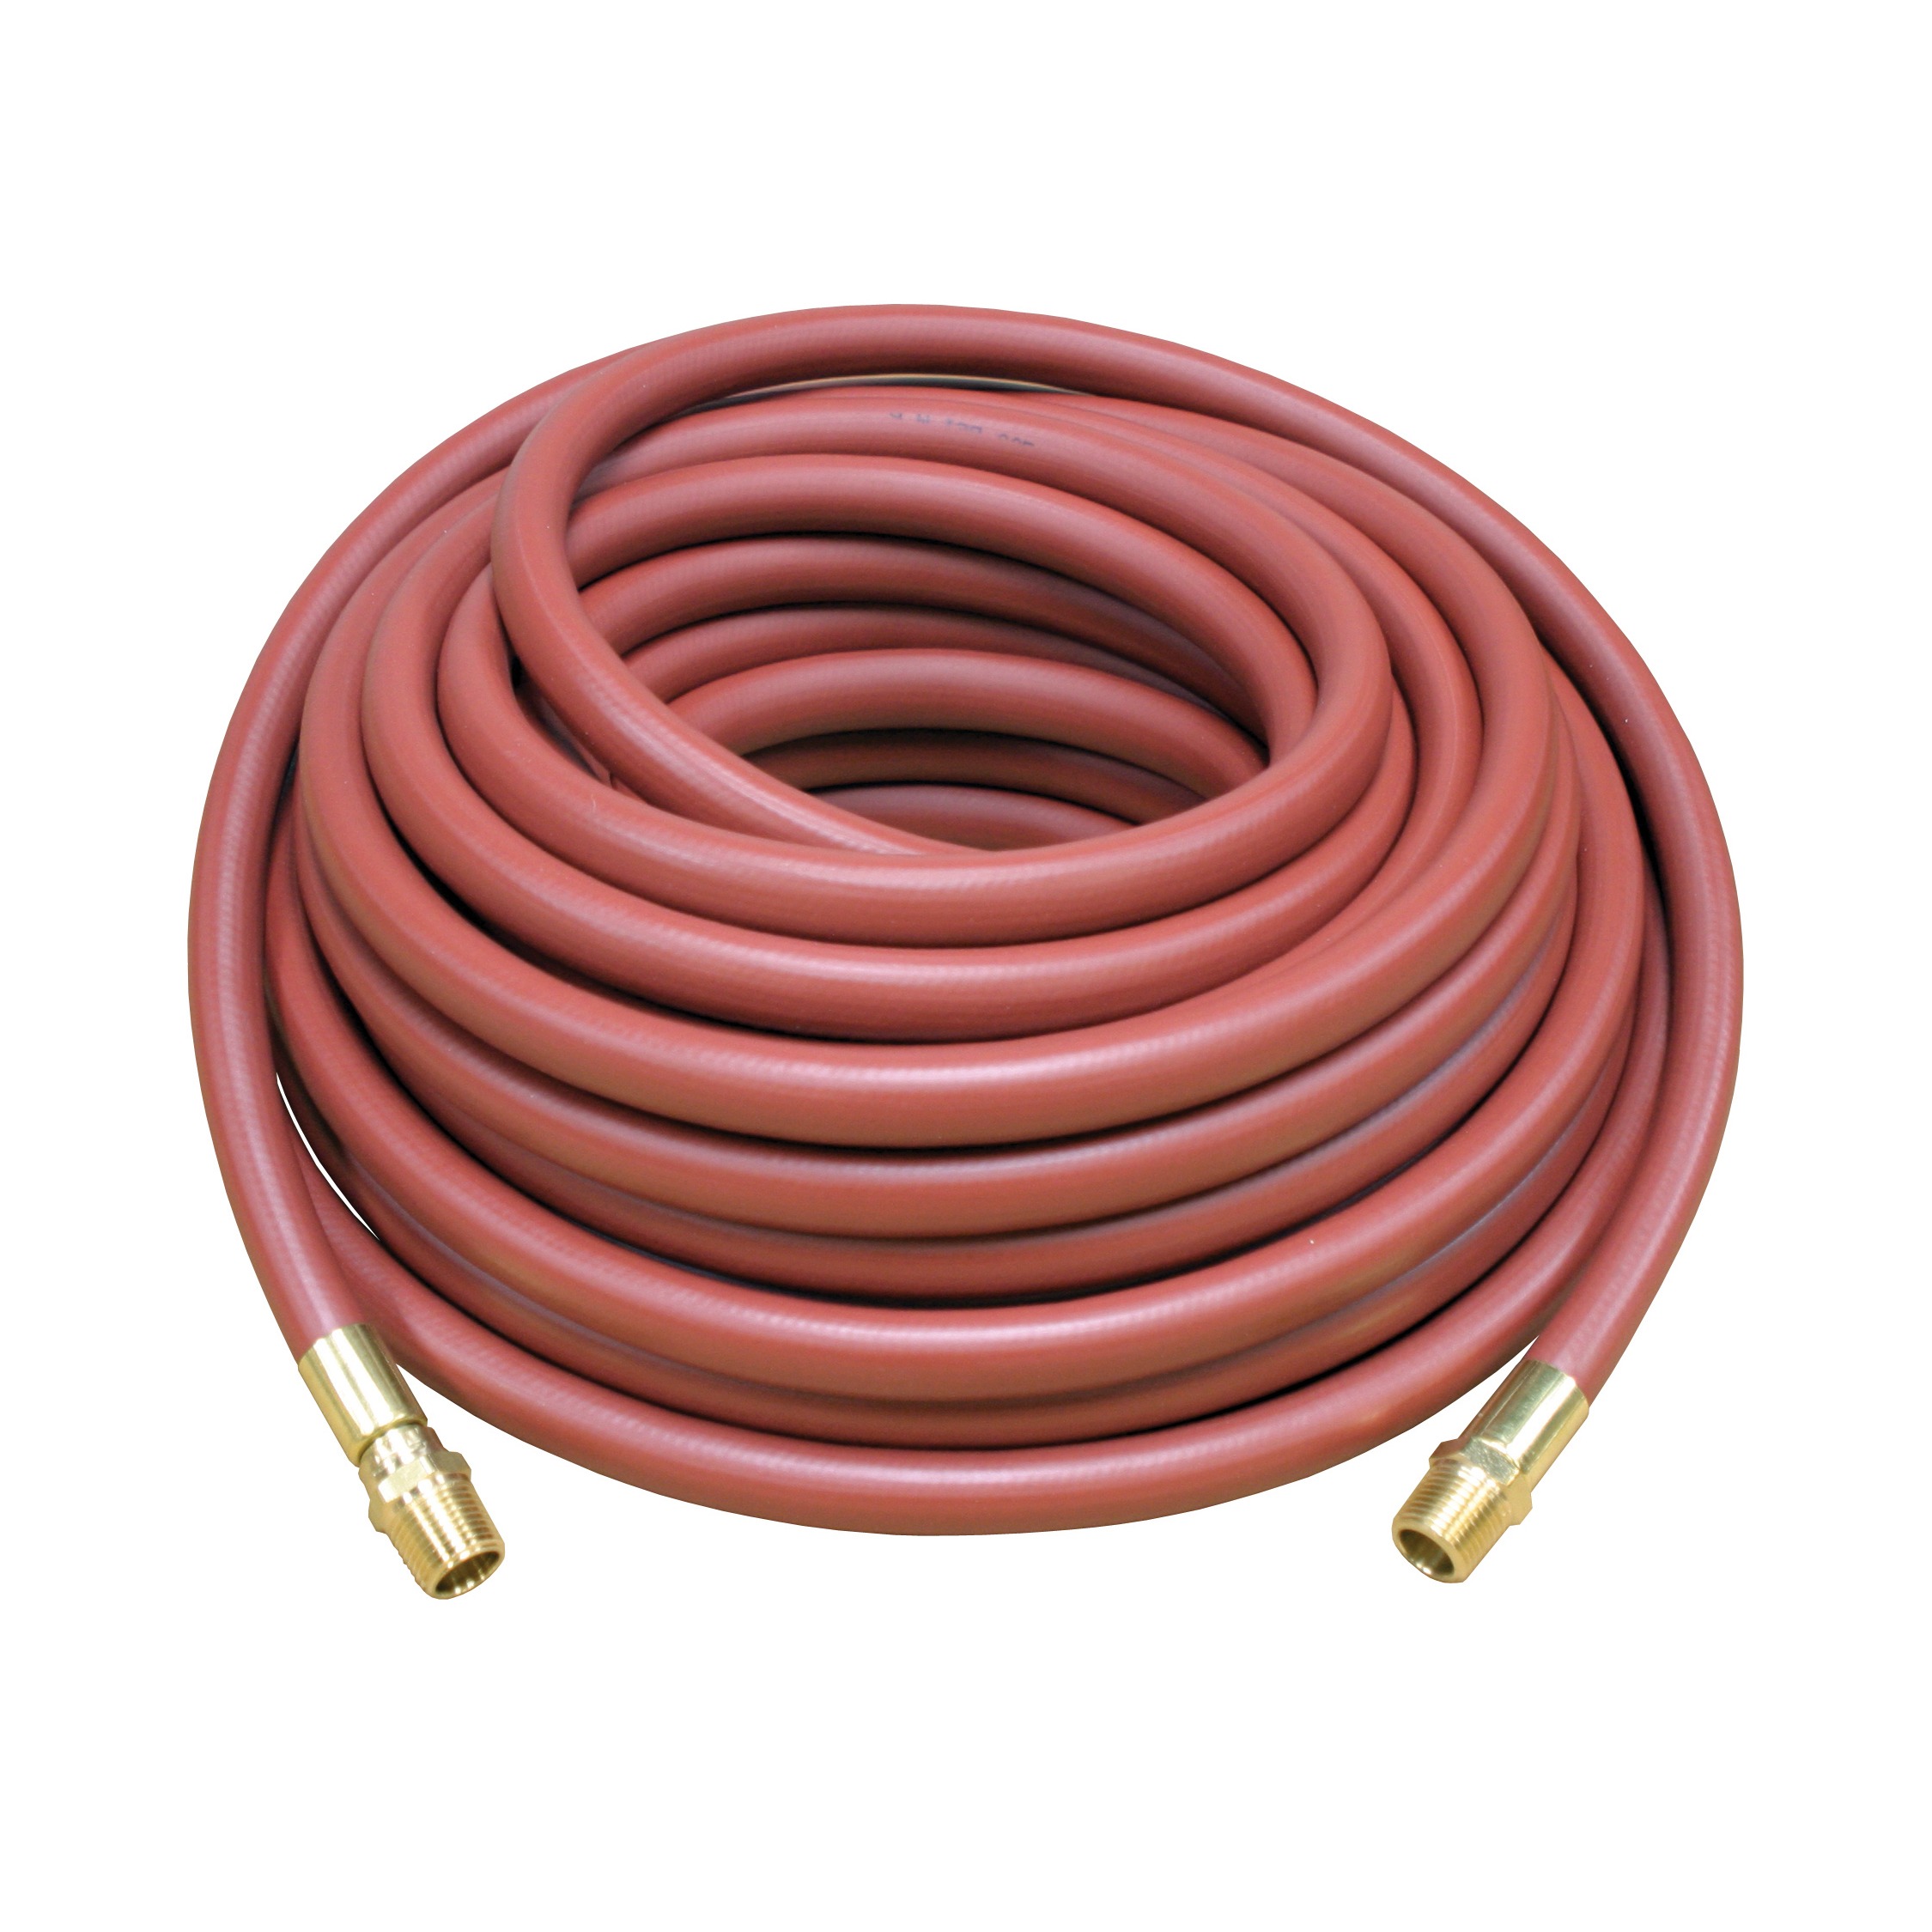 Reelcraft S601026-100 - 3/4 in. x 100 ft. Low Pressure Air/Water Hose